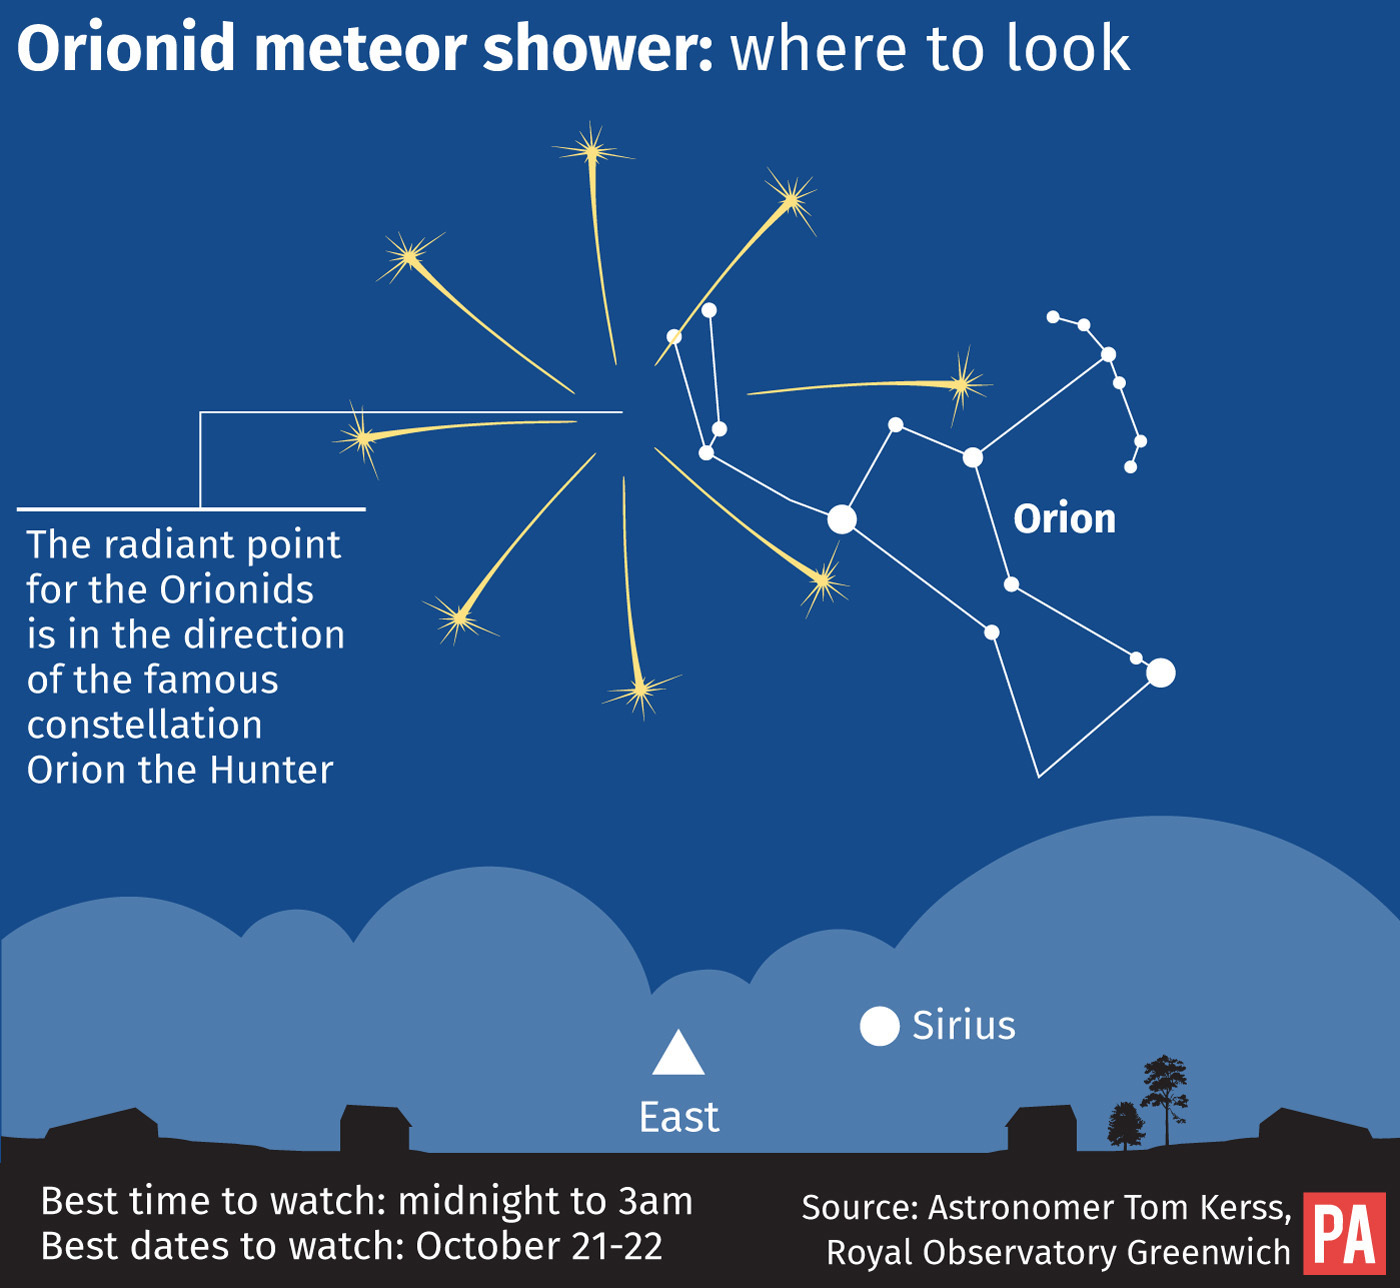 Orionid meteor shower, best times to view and where to look